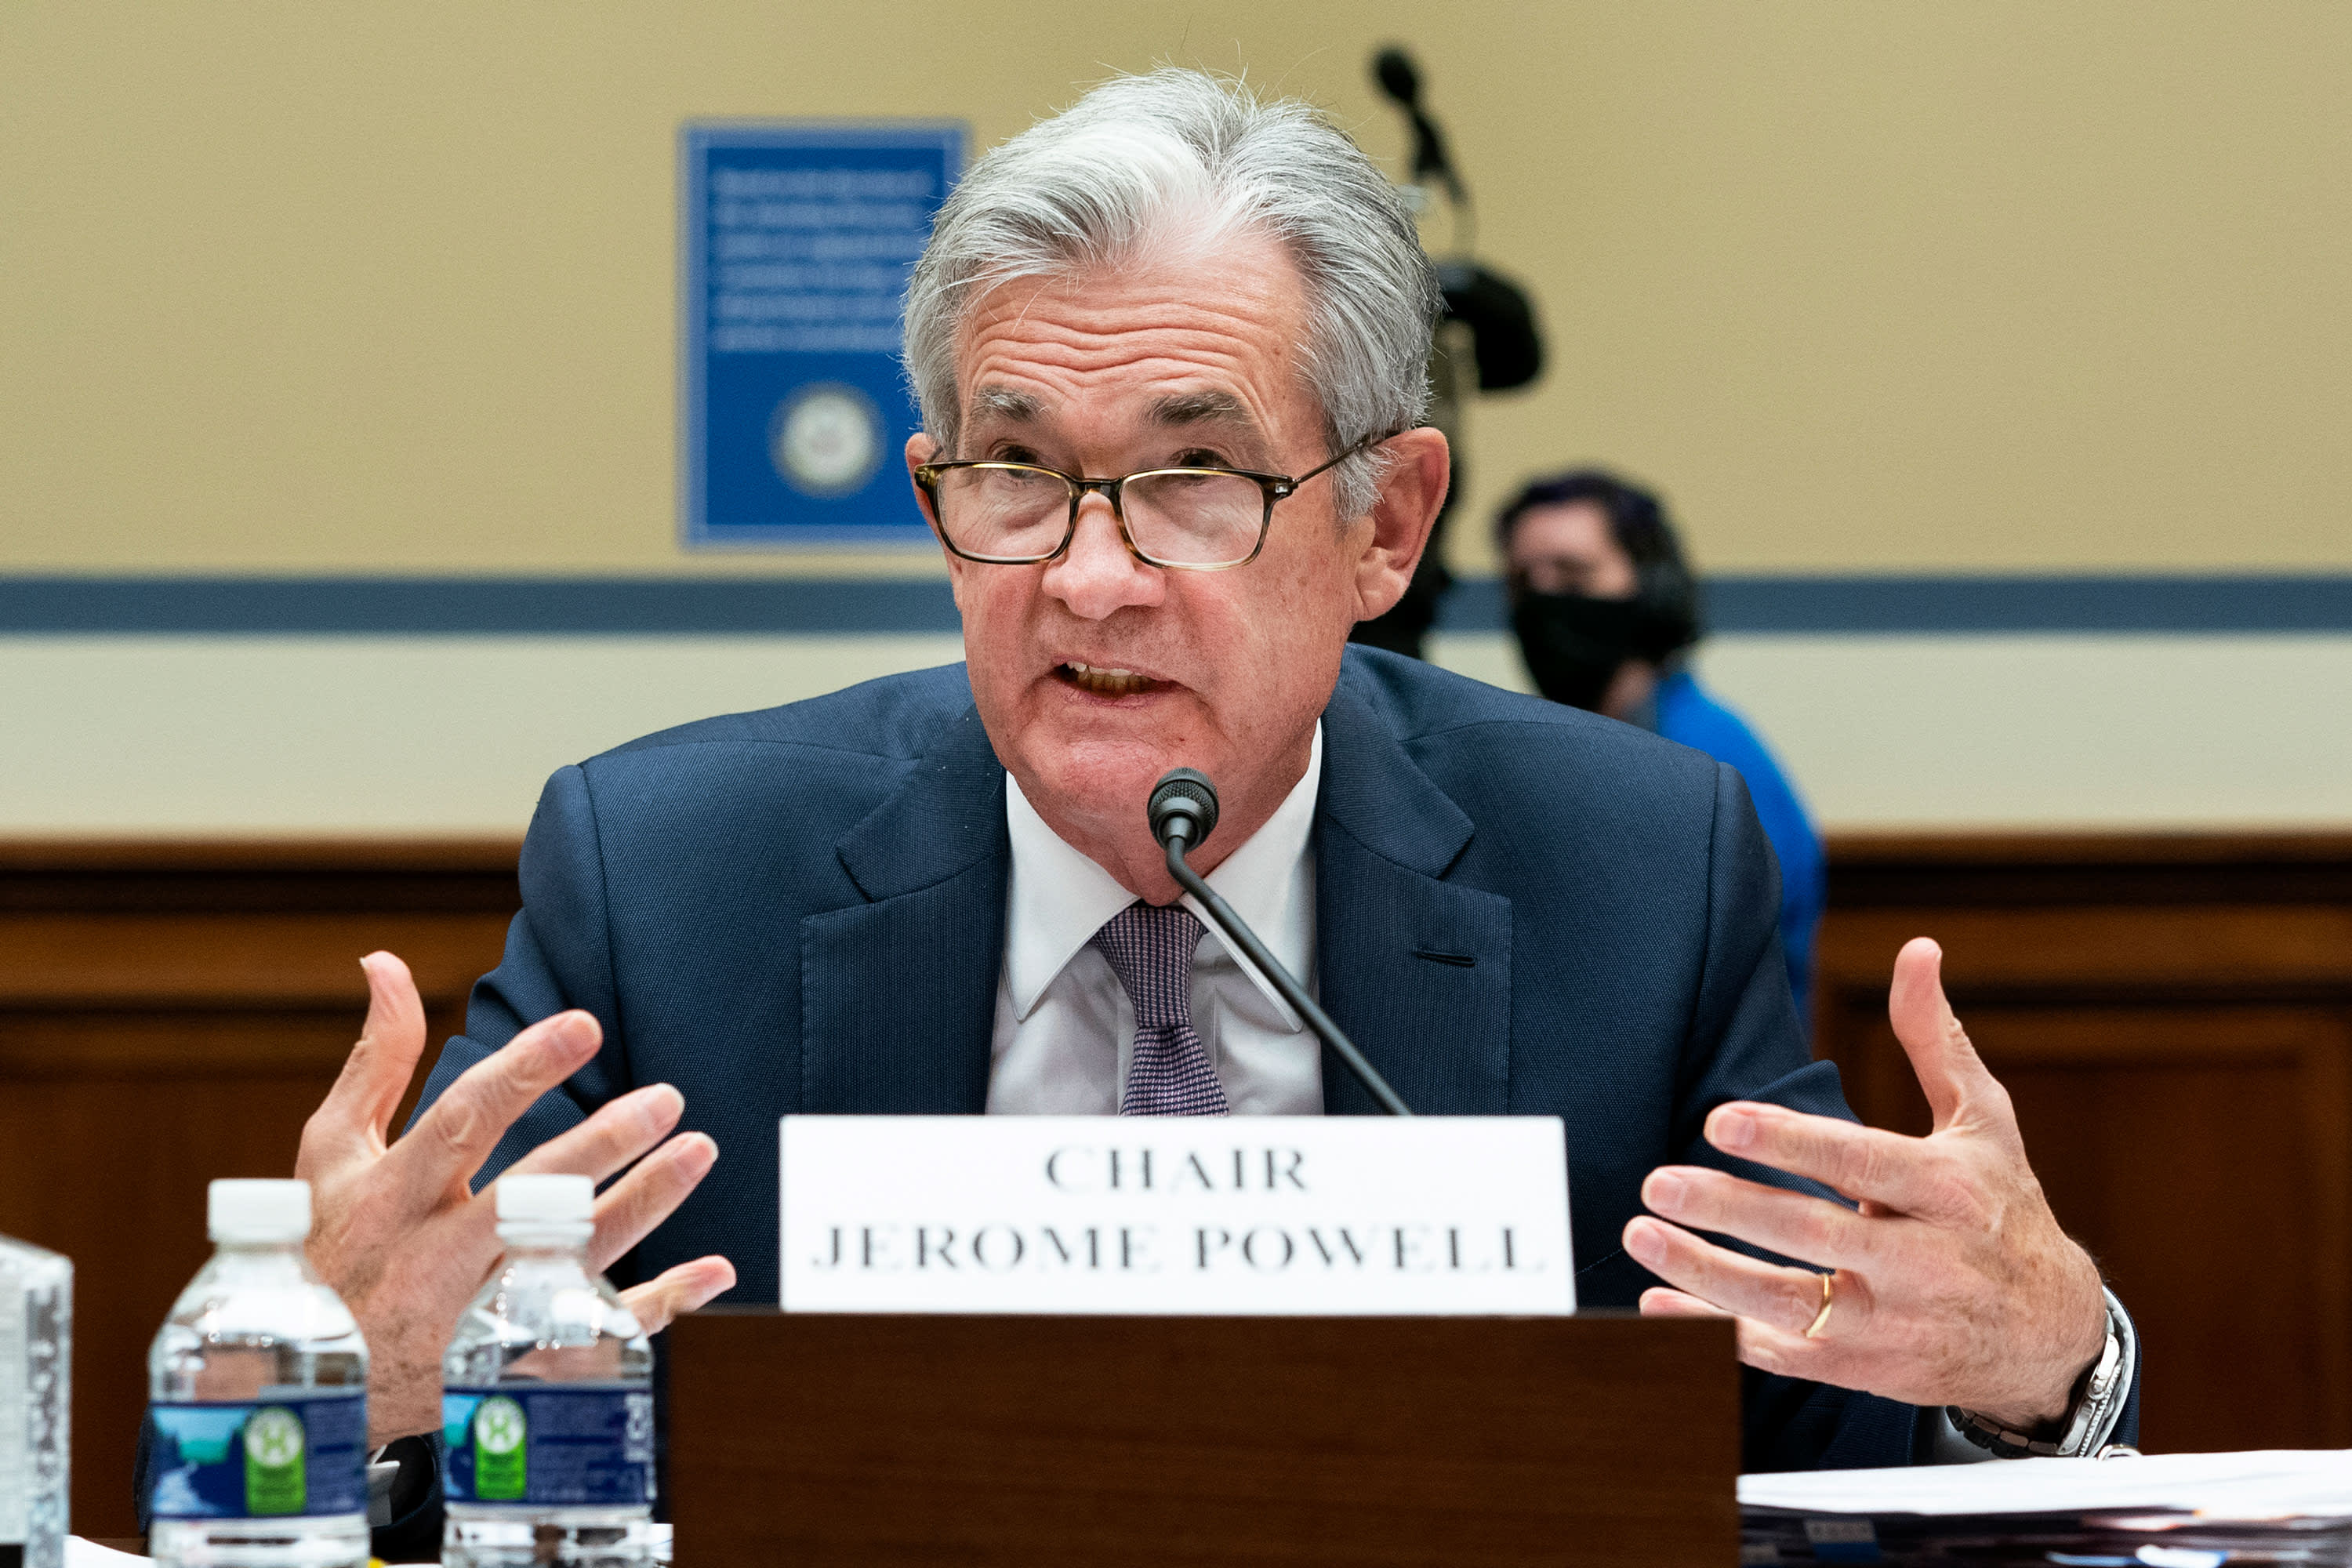 Powell sees no interest rate hikes on the horizon as long as inflation remains low